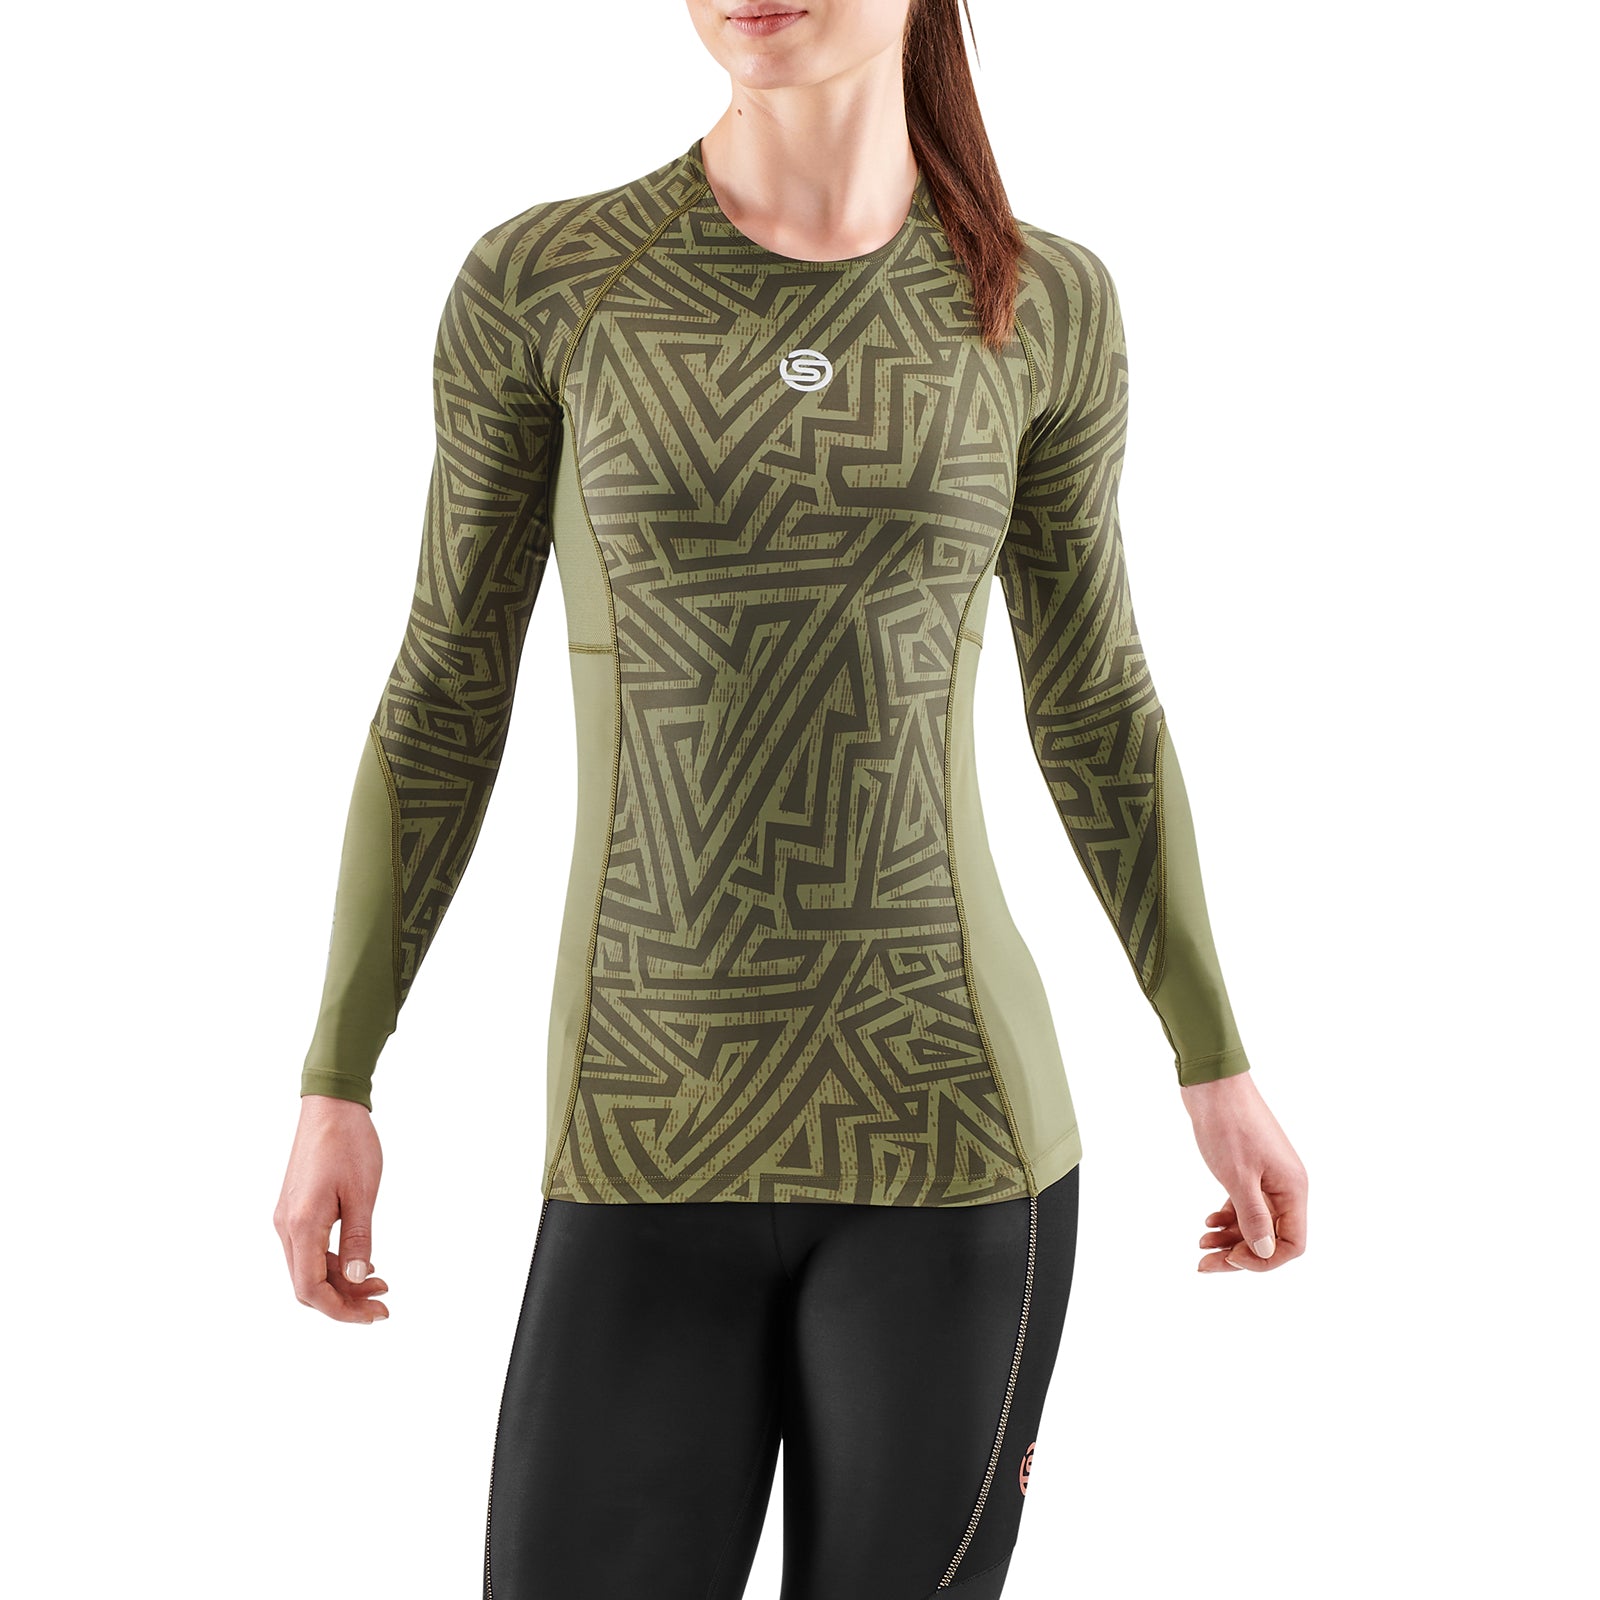 SKINS SERIES-5 WOMEN'S LONG SLEEVE TOP THISTLE DOWN - SKINS Compression USA